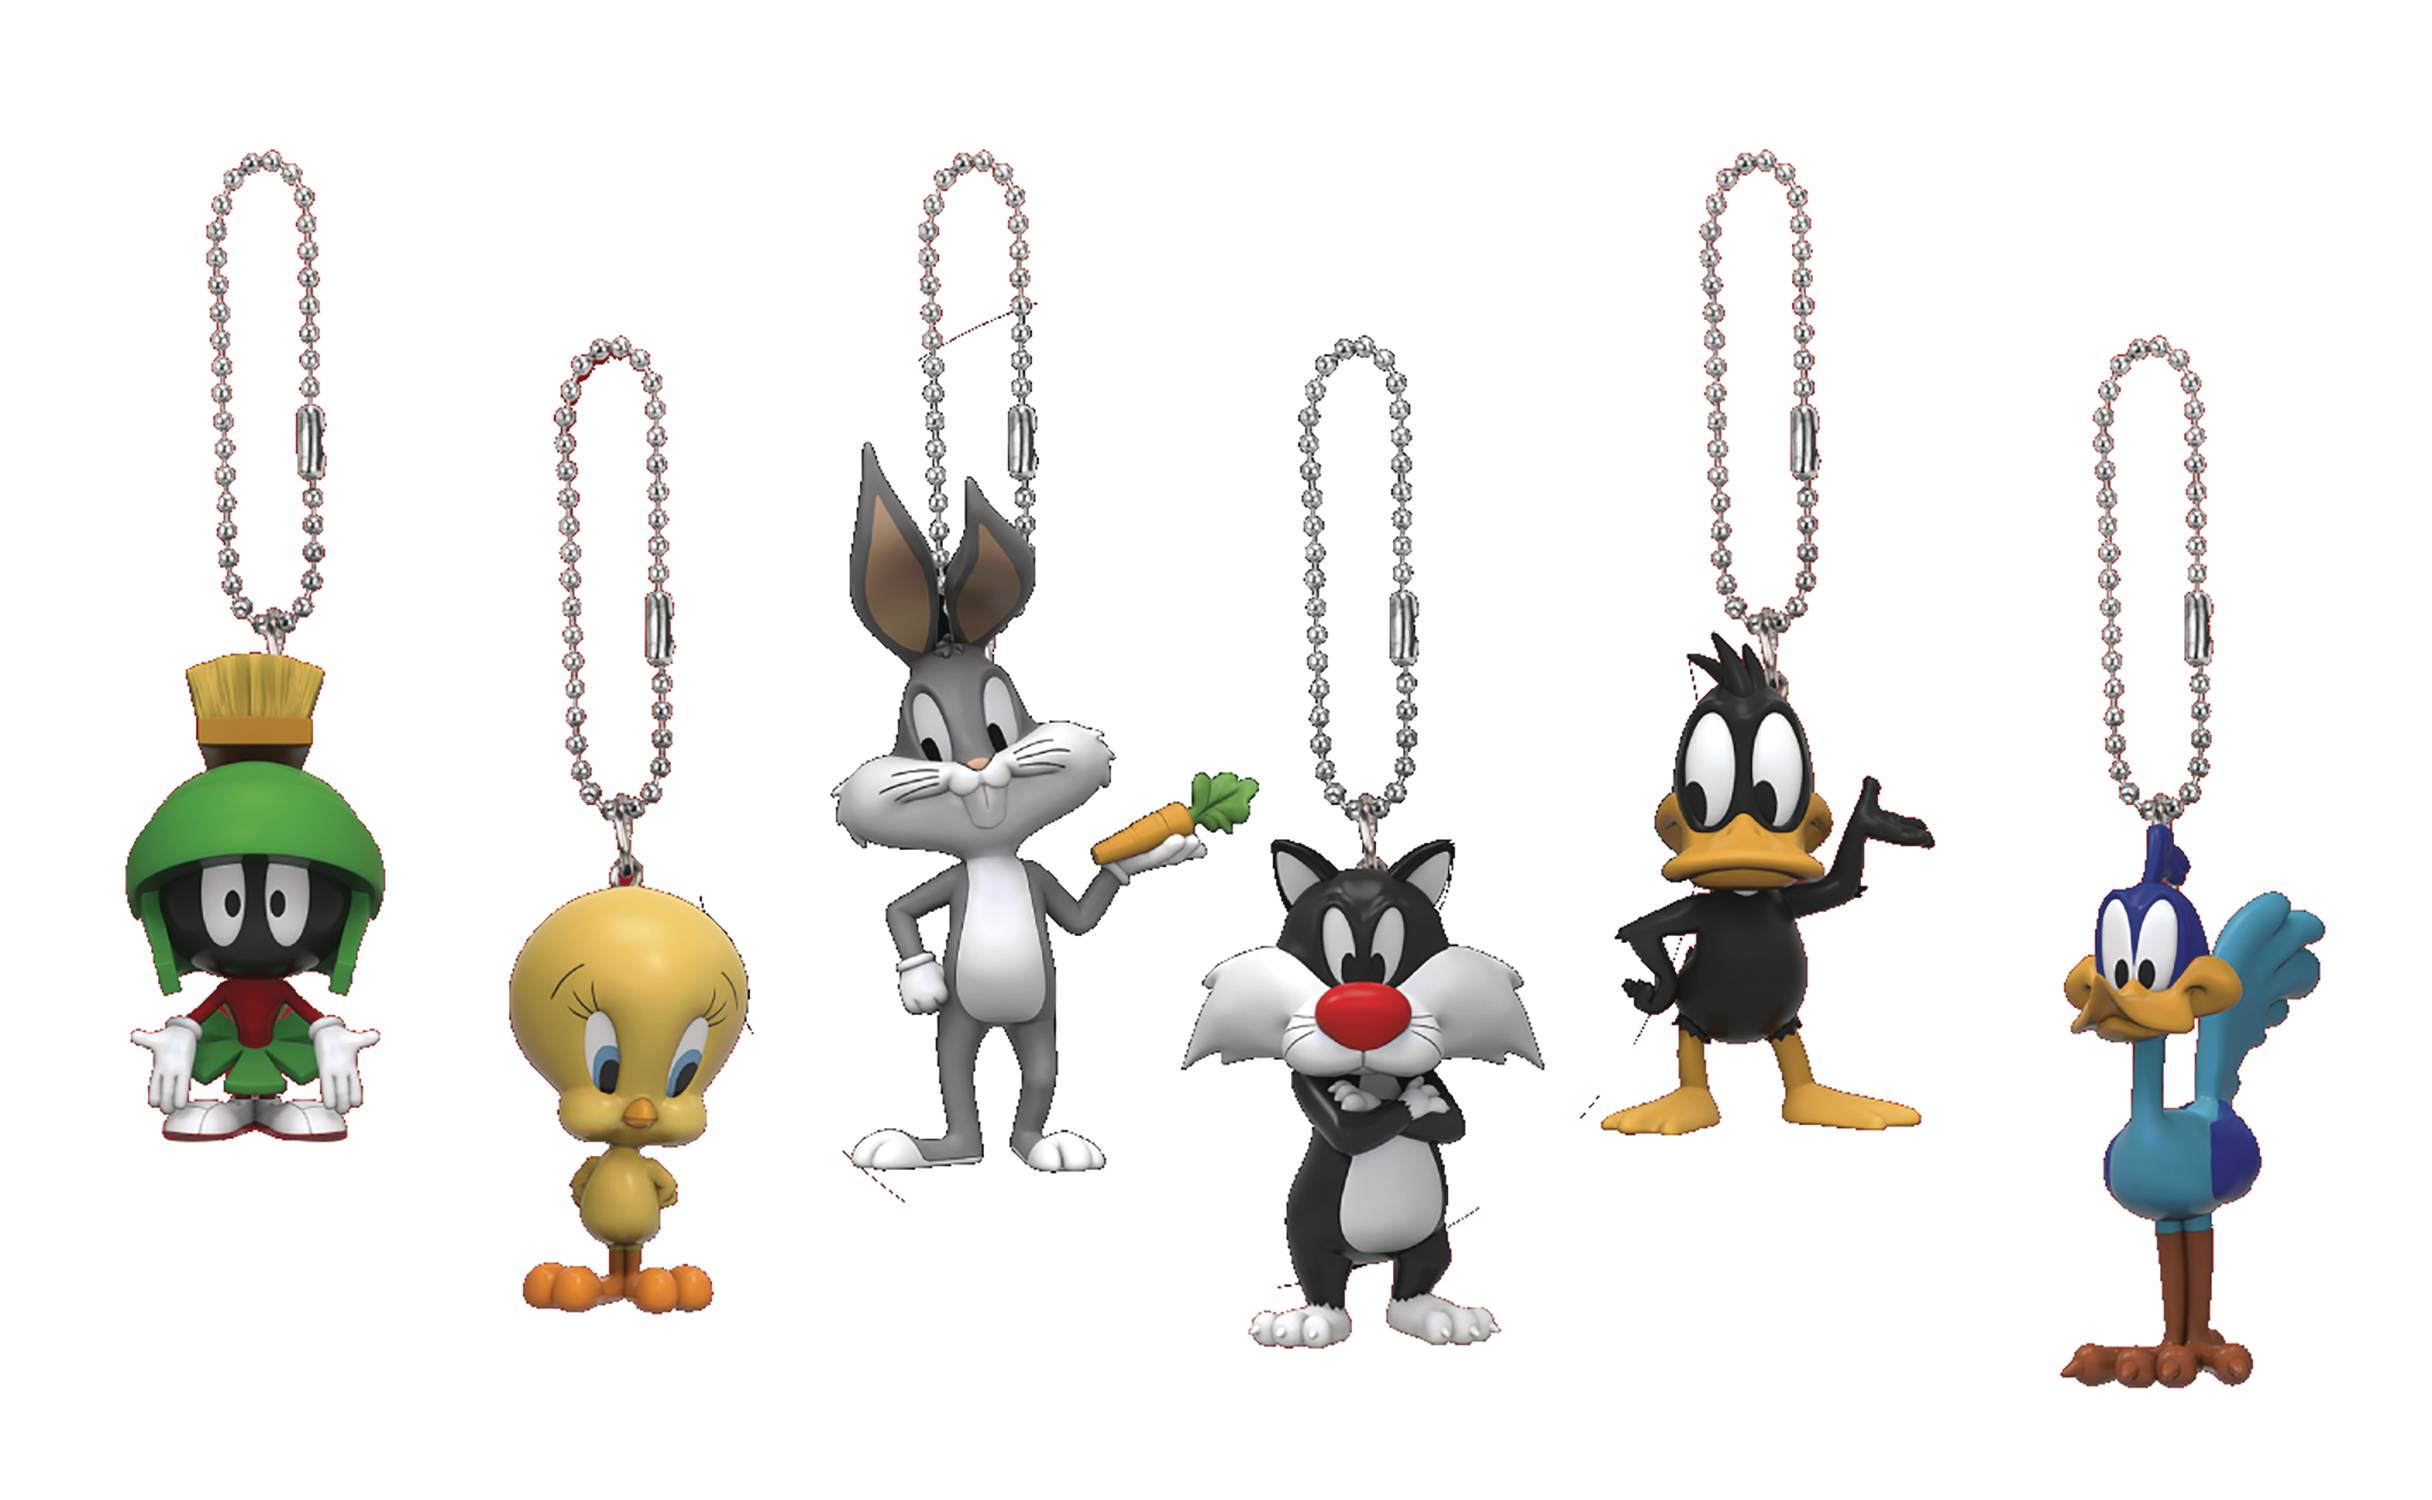 LOONEY TUNES KC-006 EGG ATTACK ACTION KEYCHAIN 6PC BMB DS (C